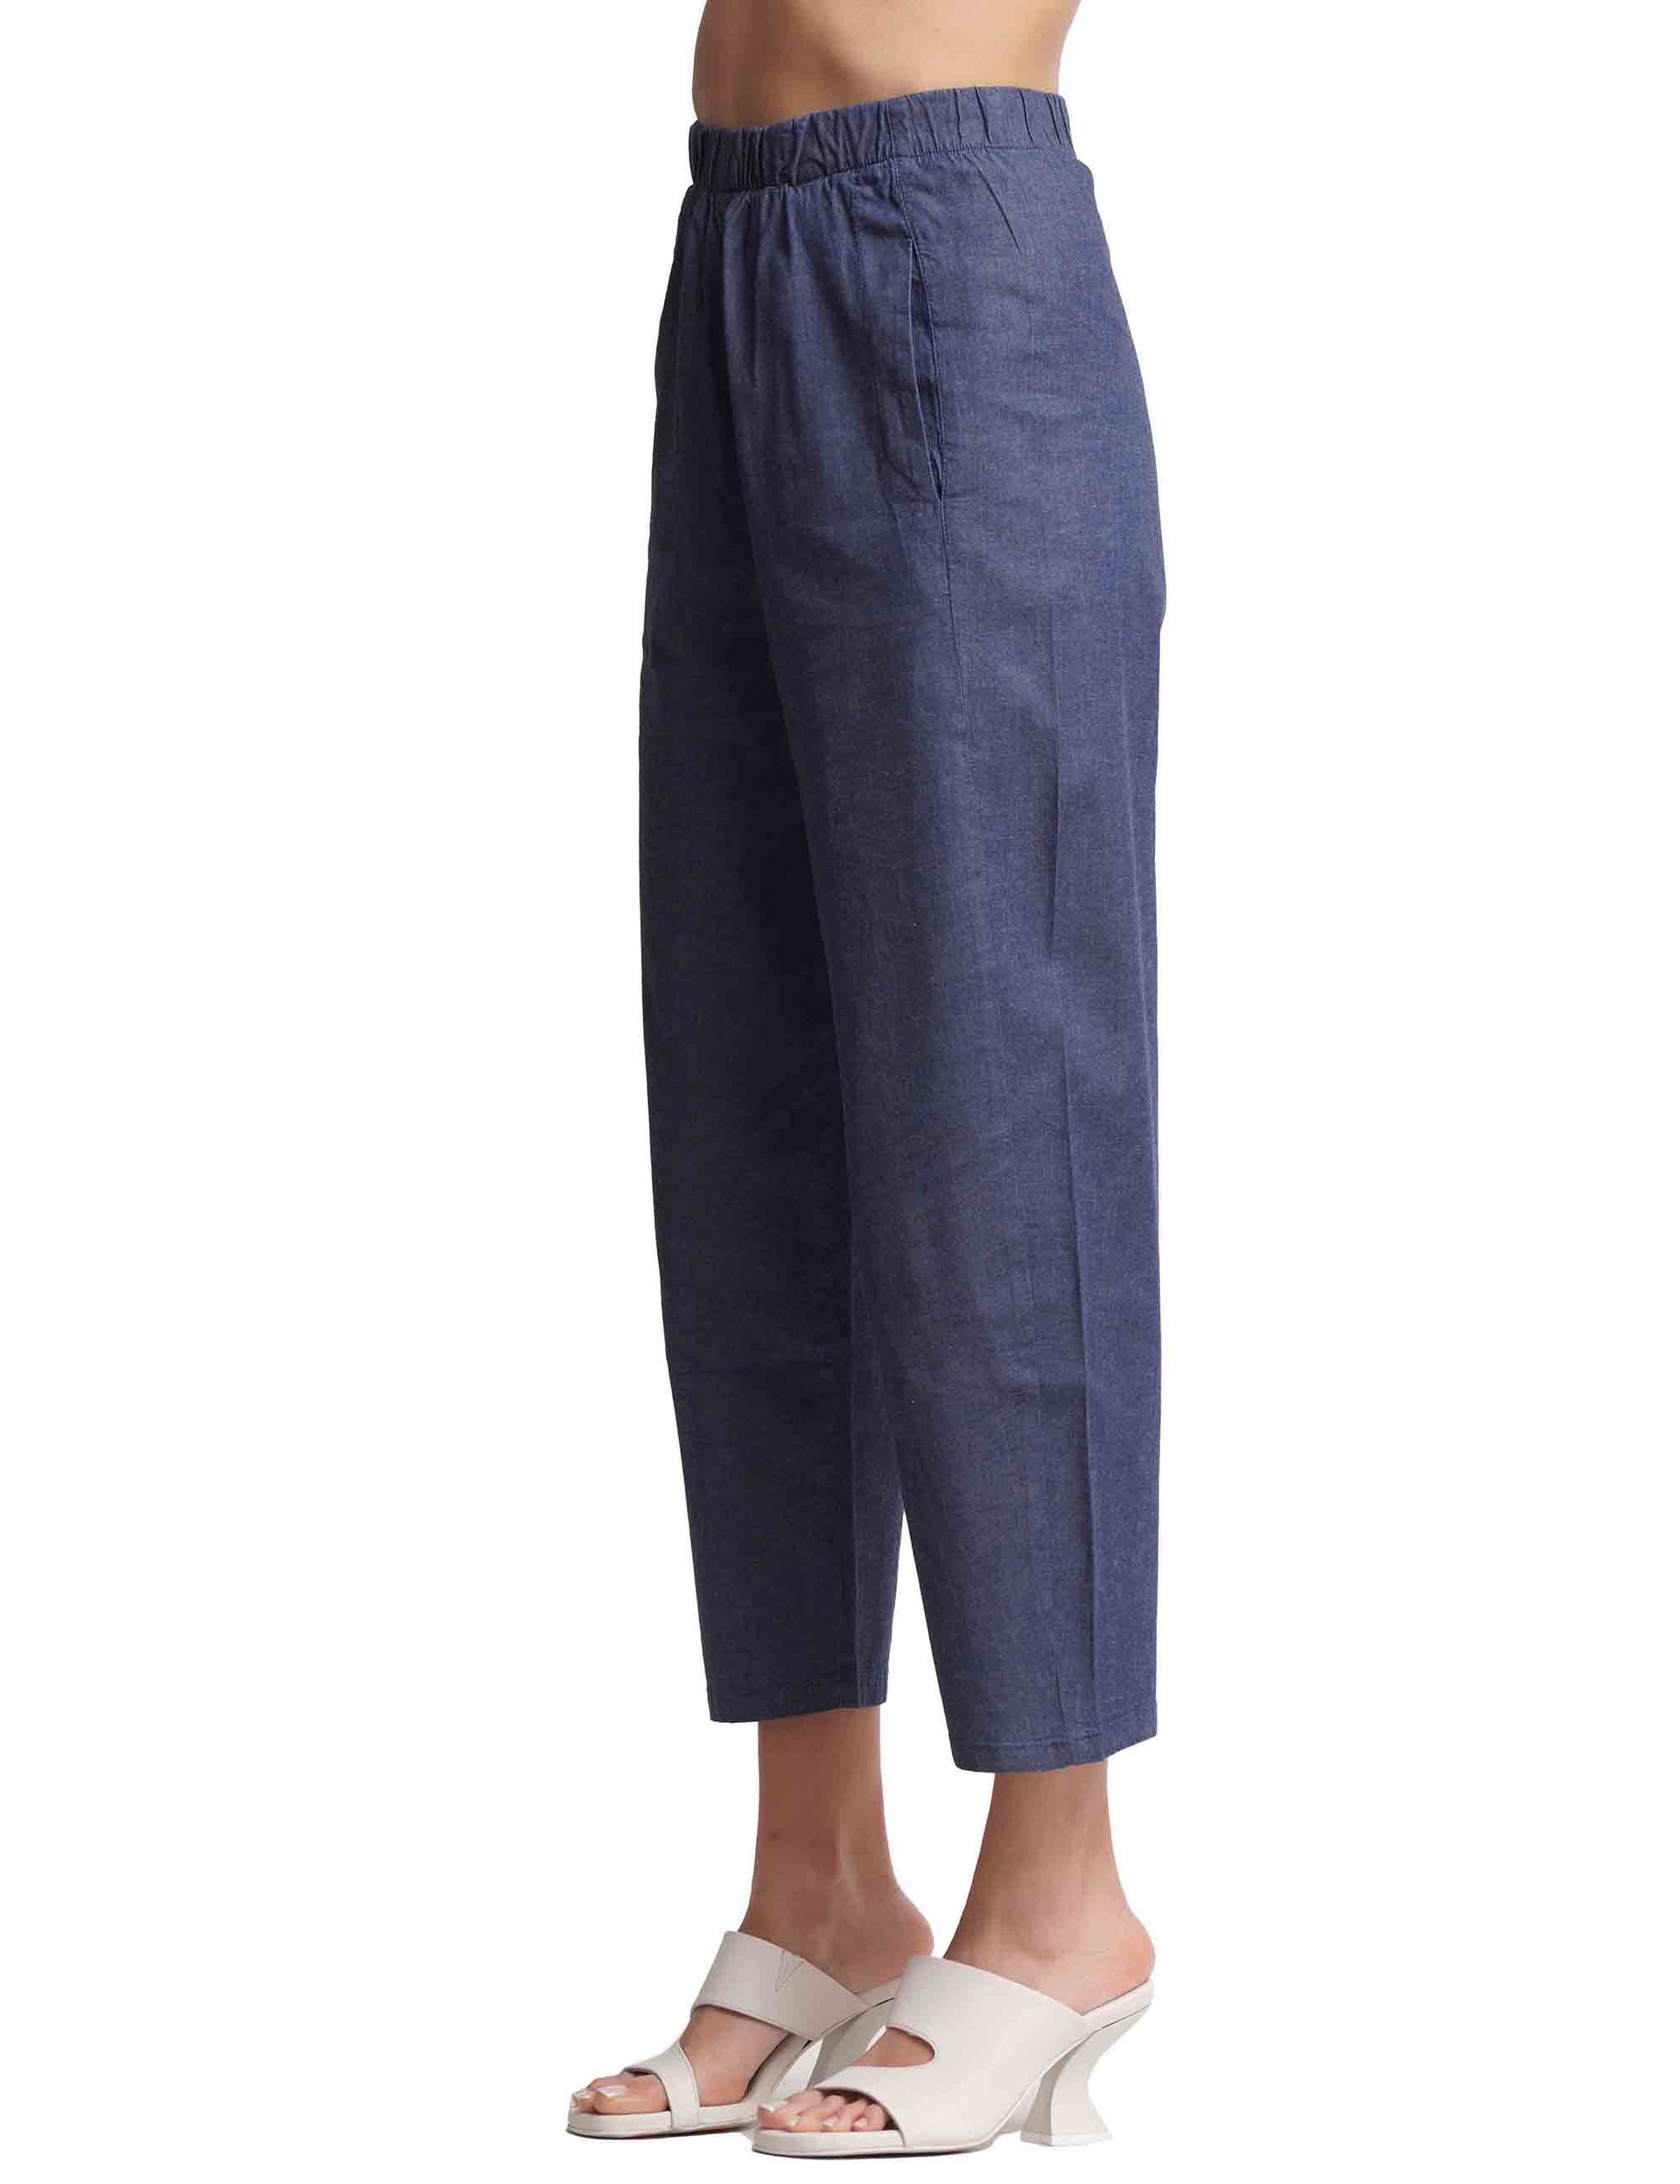 Women's blue cotton trousers with elastic waist and French pockets